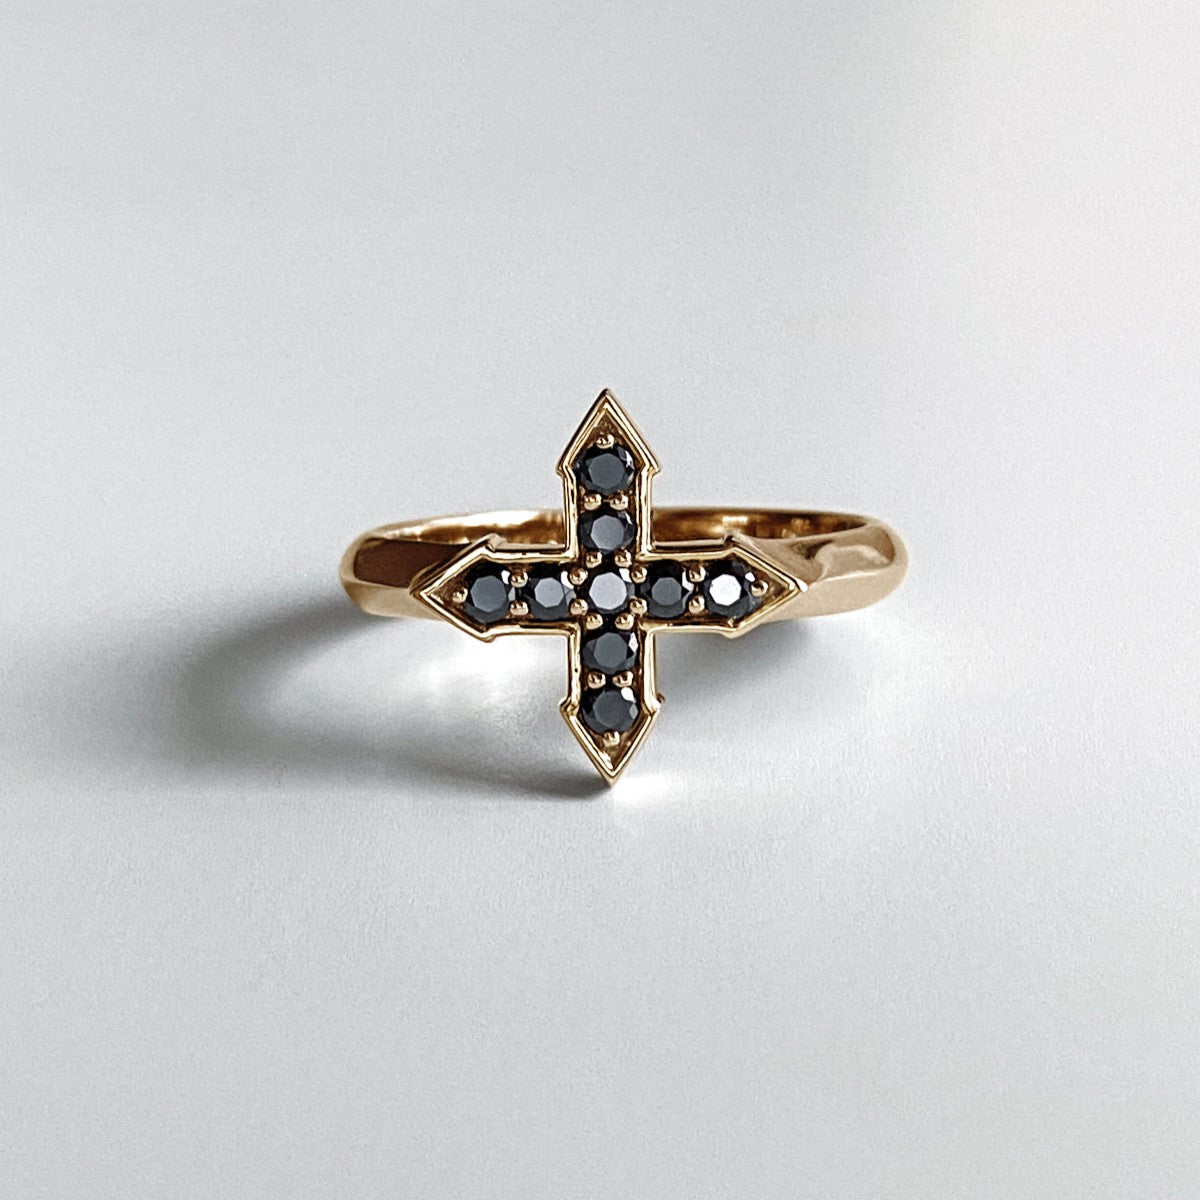 RING "STAR GLOW" WITH BLACK DIAMONDS / SOLID GOLD